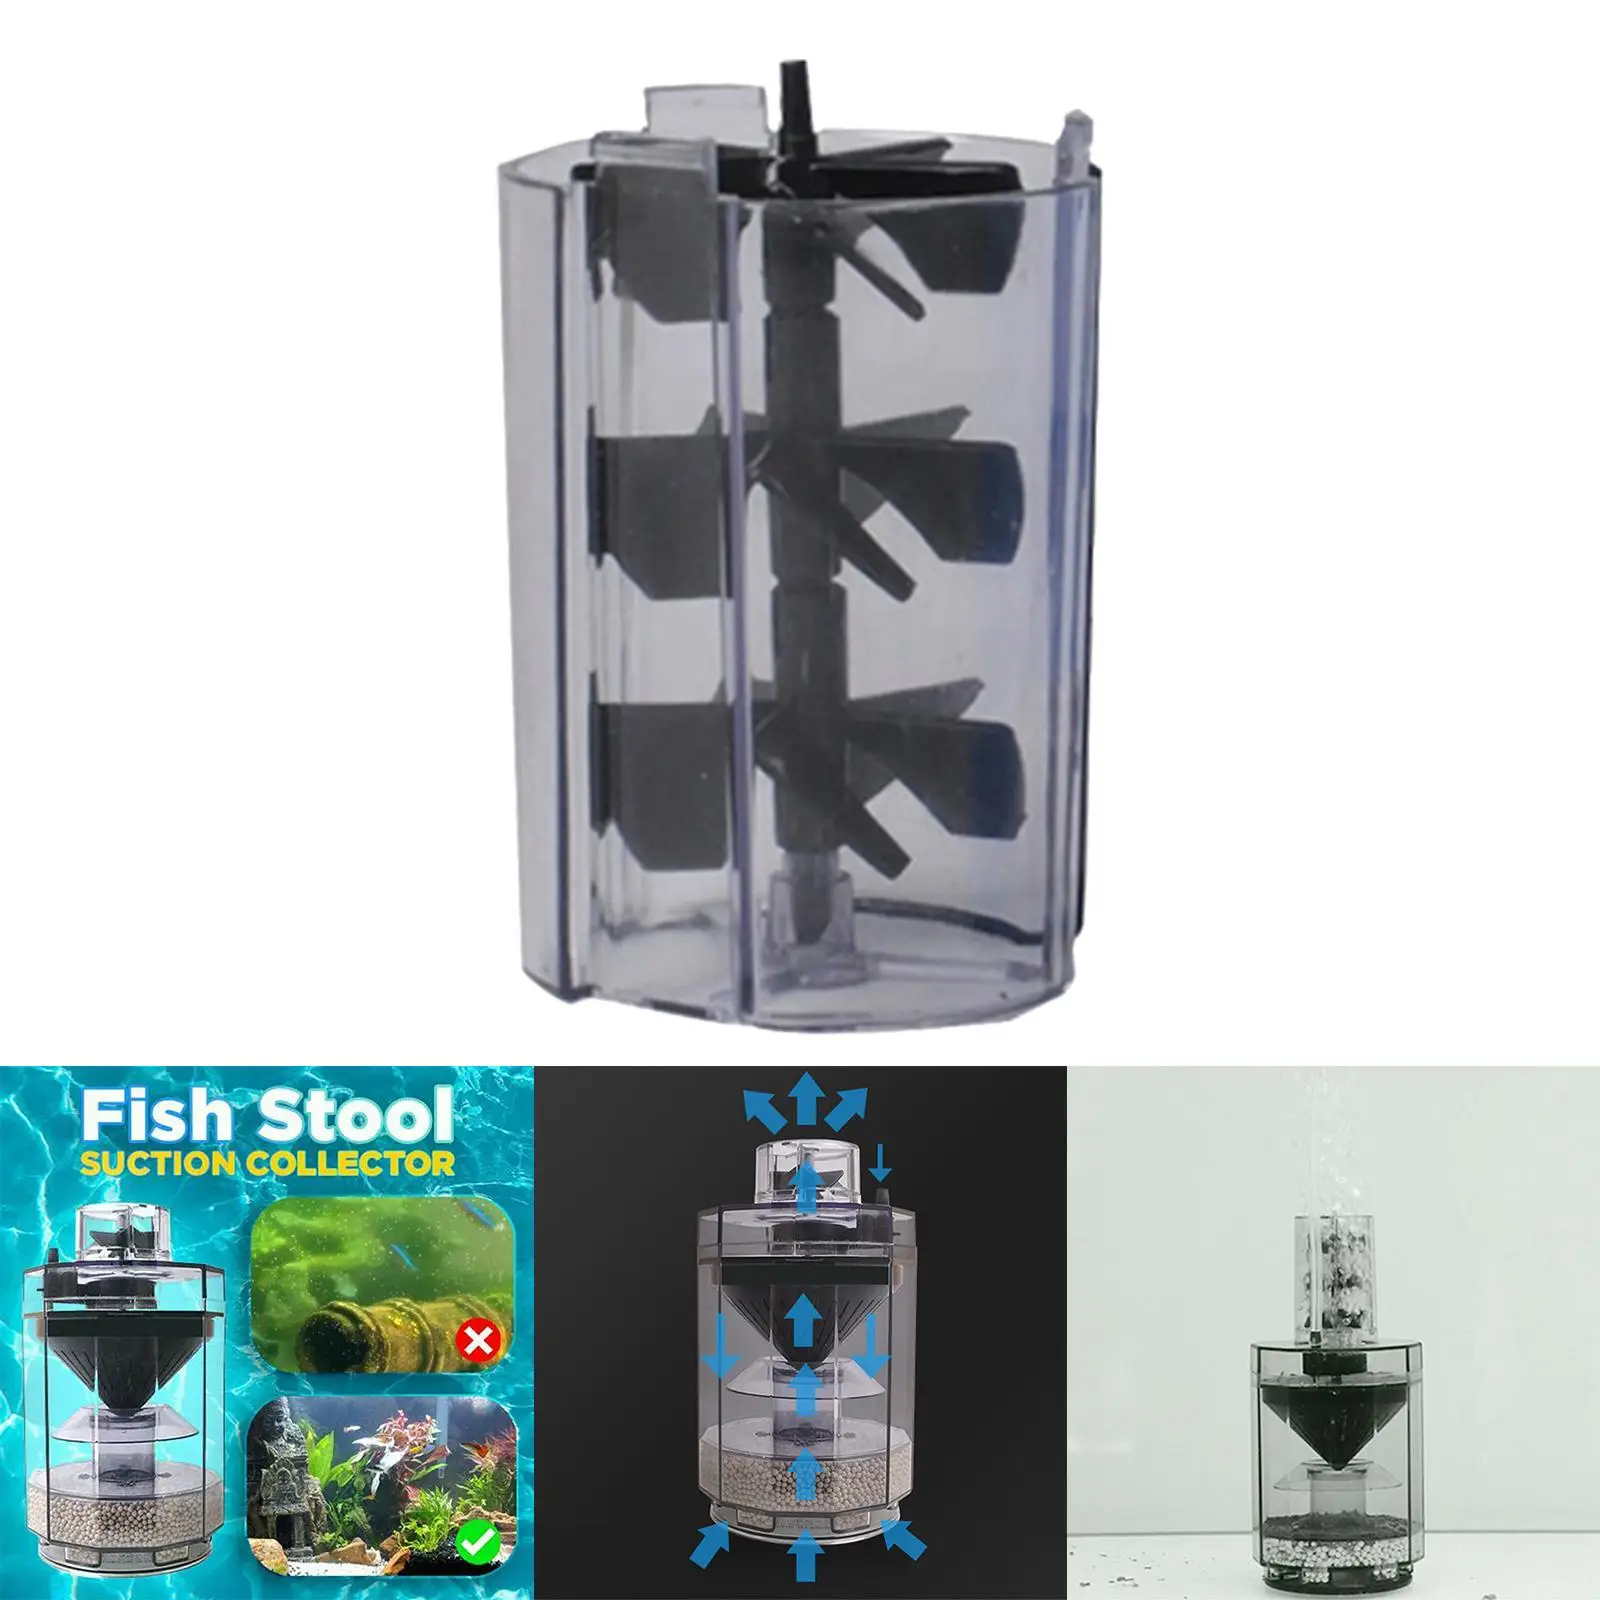 Spiral Fan Flow Promoting for Fish Stool Suction Collector Tank of Fish Filter Bucket